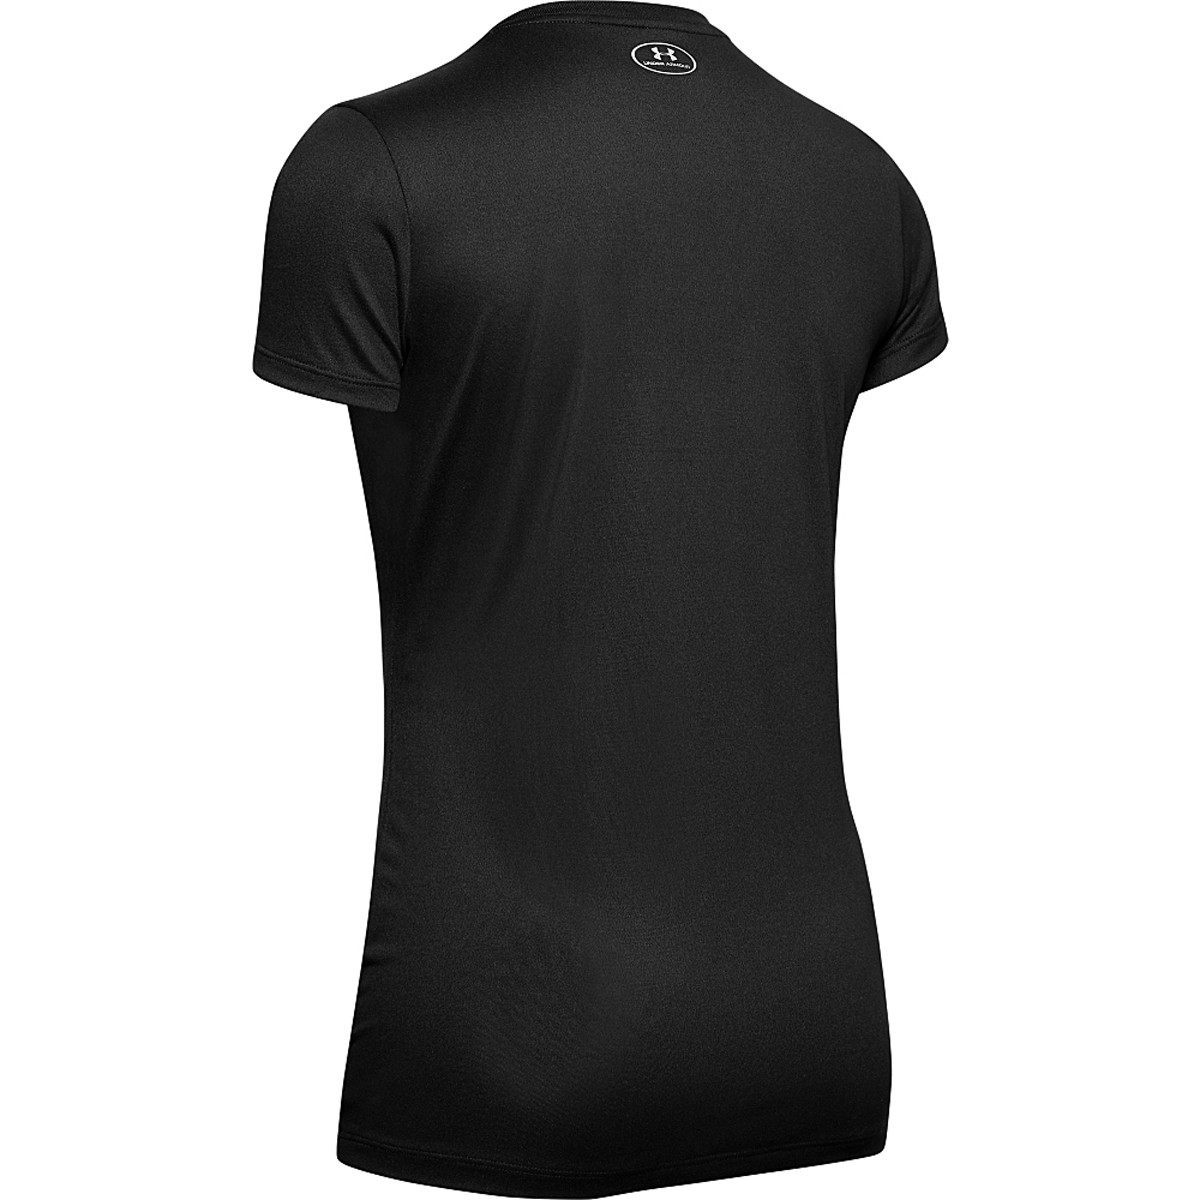 CAMISETA UNDER ARMOUR MUJER TECH SOLID - UNDER ARMOUR - Mujer